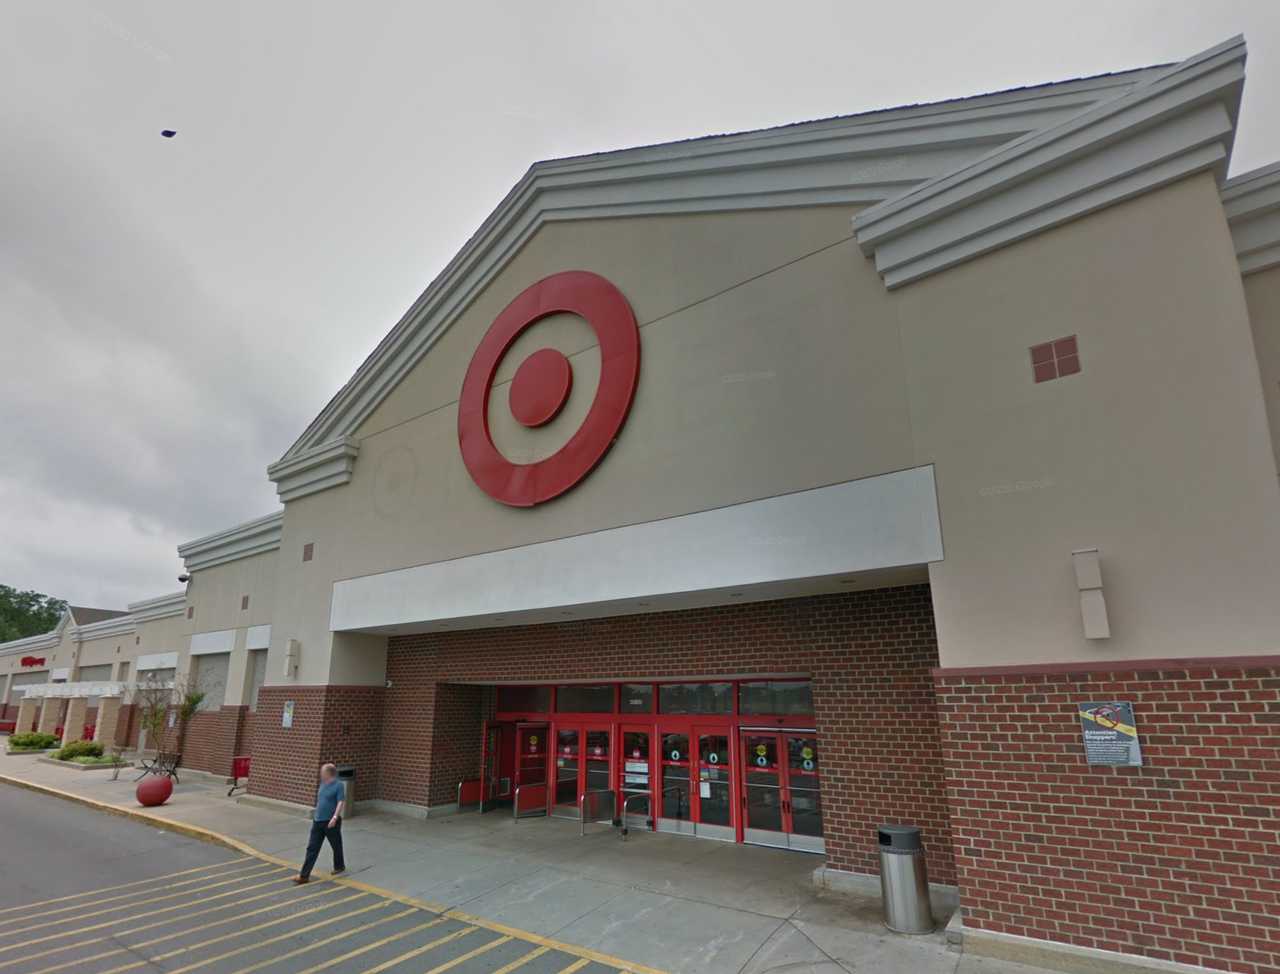 Target Temporarily Evacuated During Sheriff's Investigation In St. Mary's County (DEVELOPING)